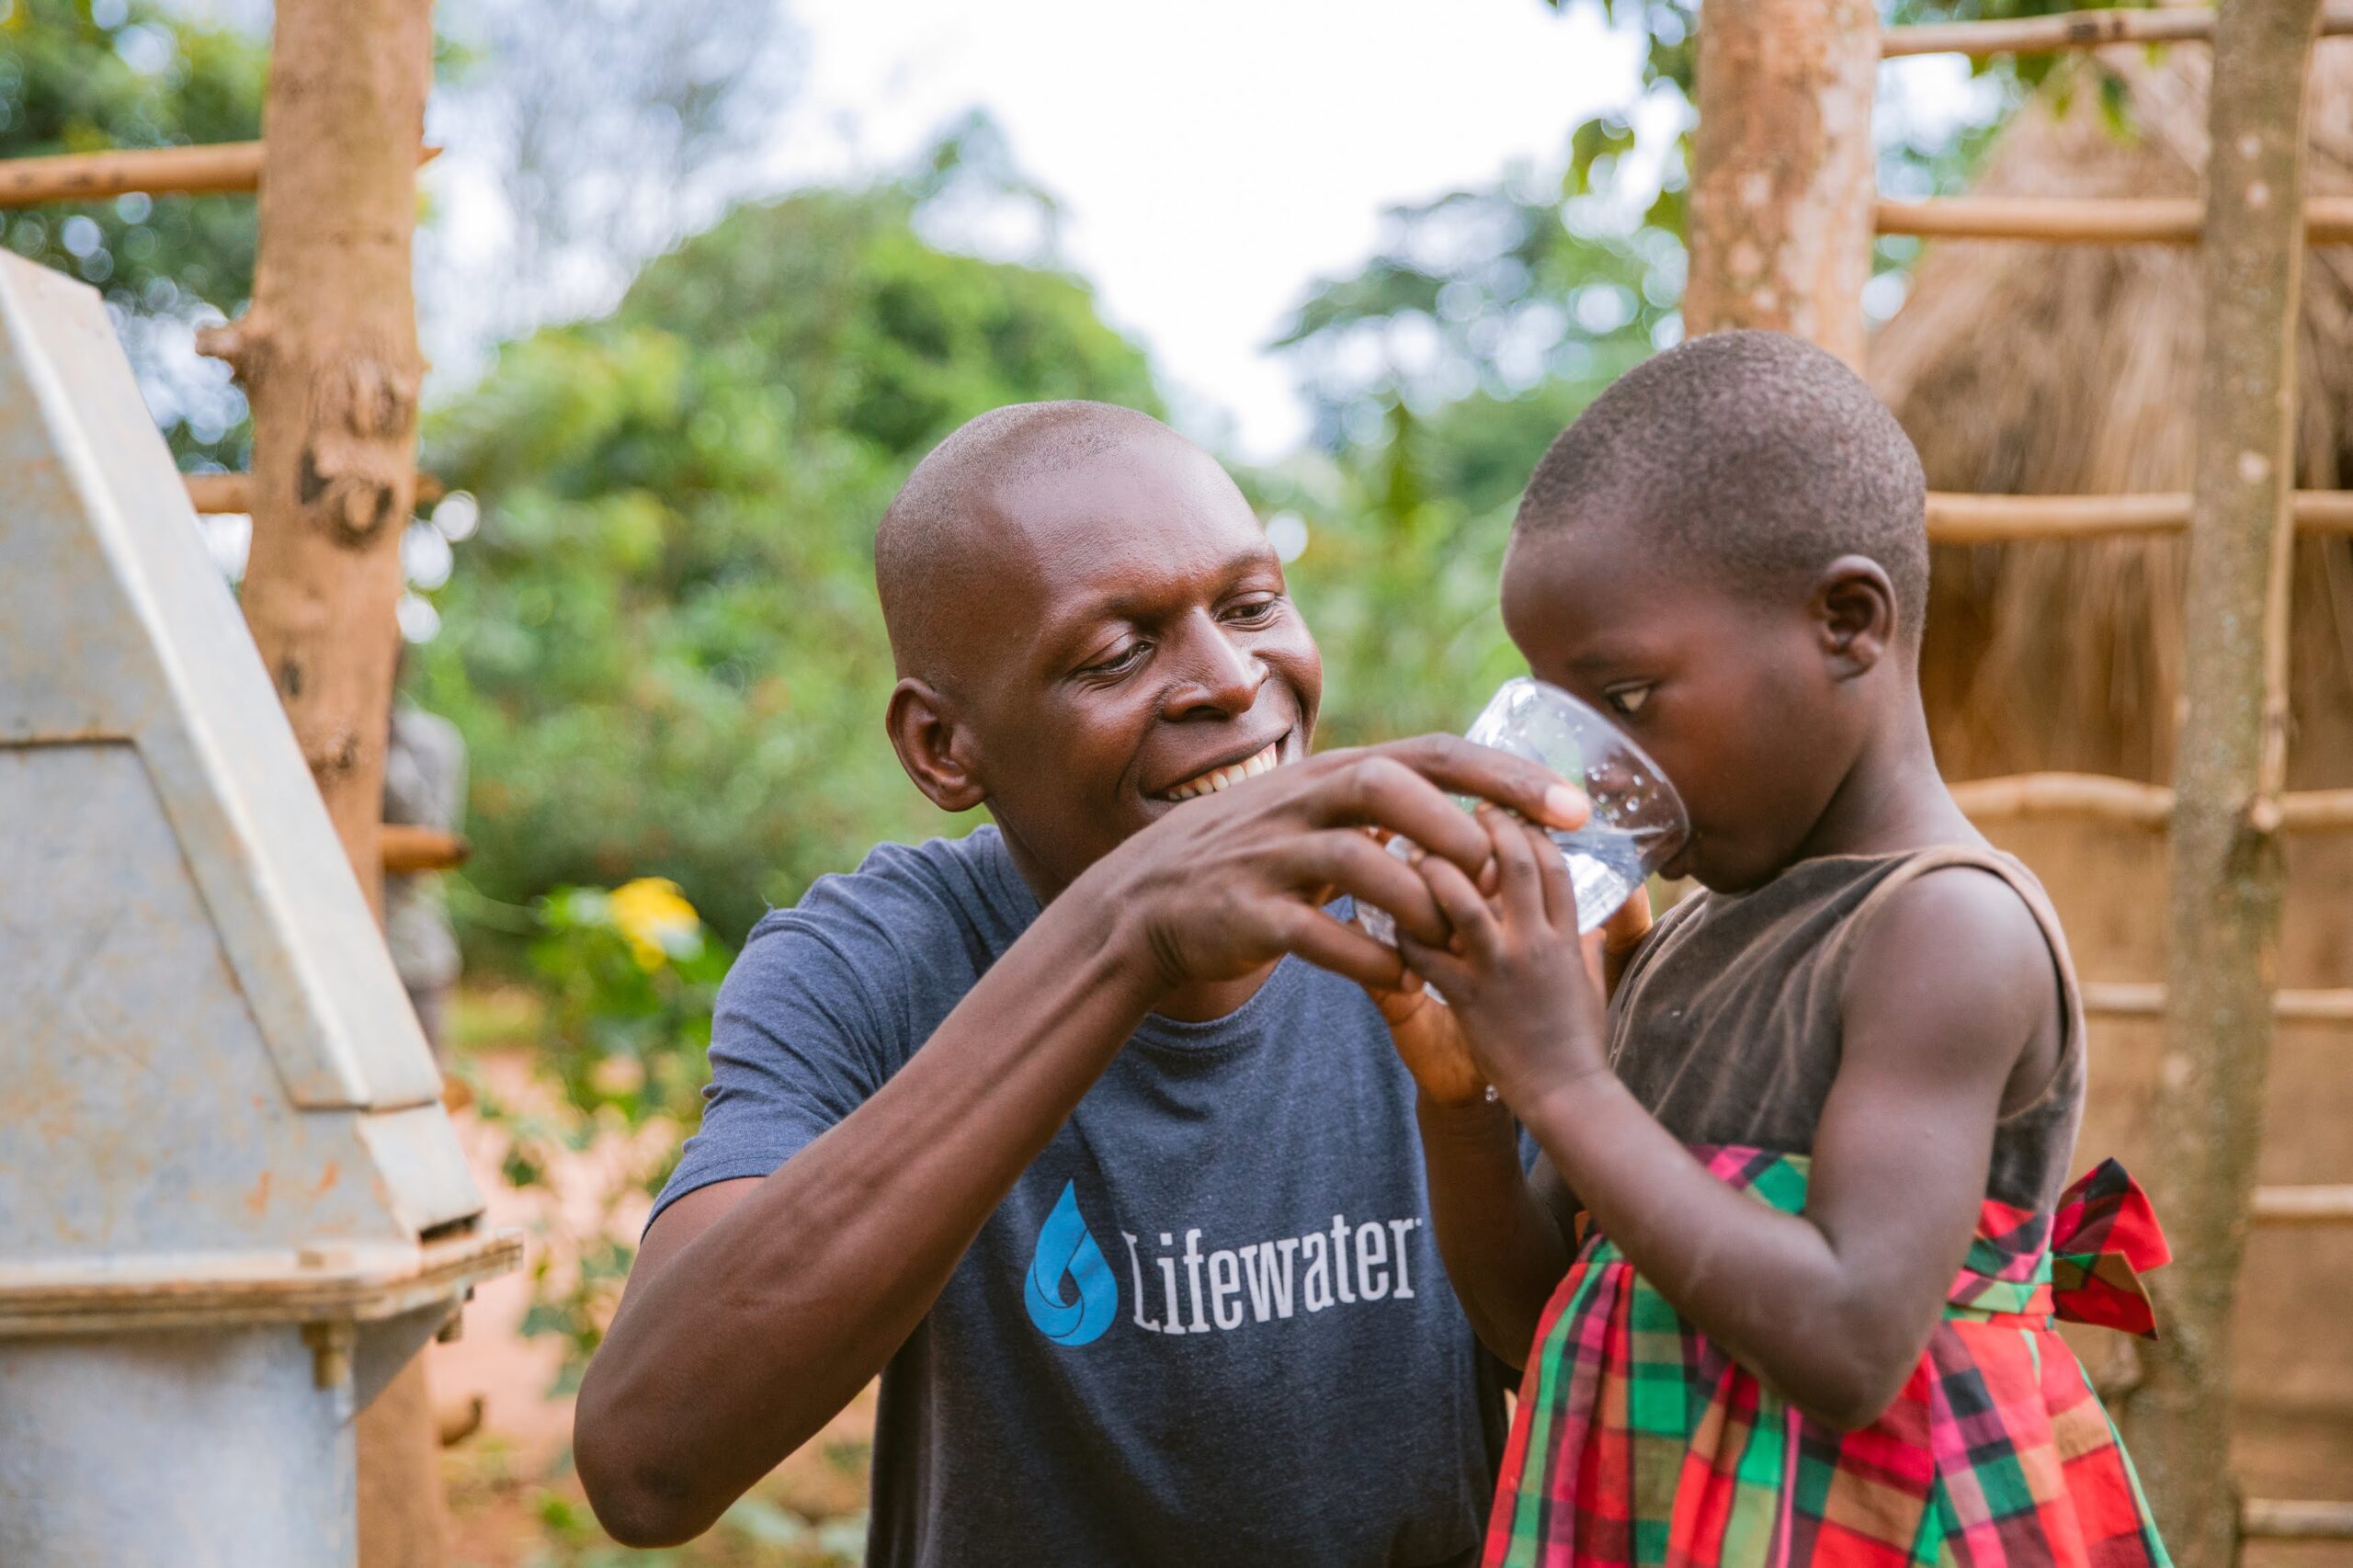 Altogether, Spotz's outreach helps great causes like Lifewater. (Photo Credit: Katie Spotz)